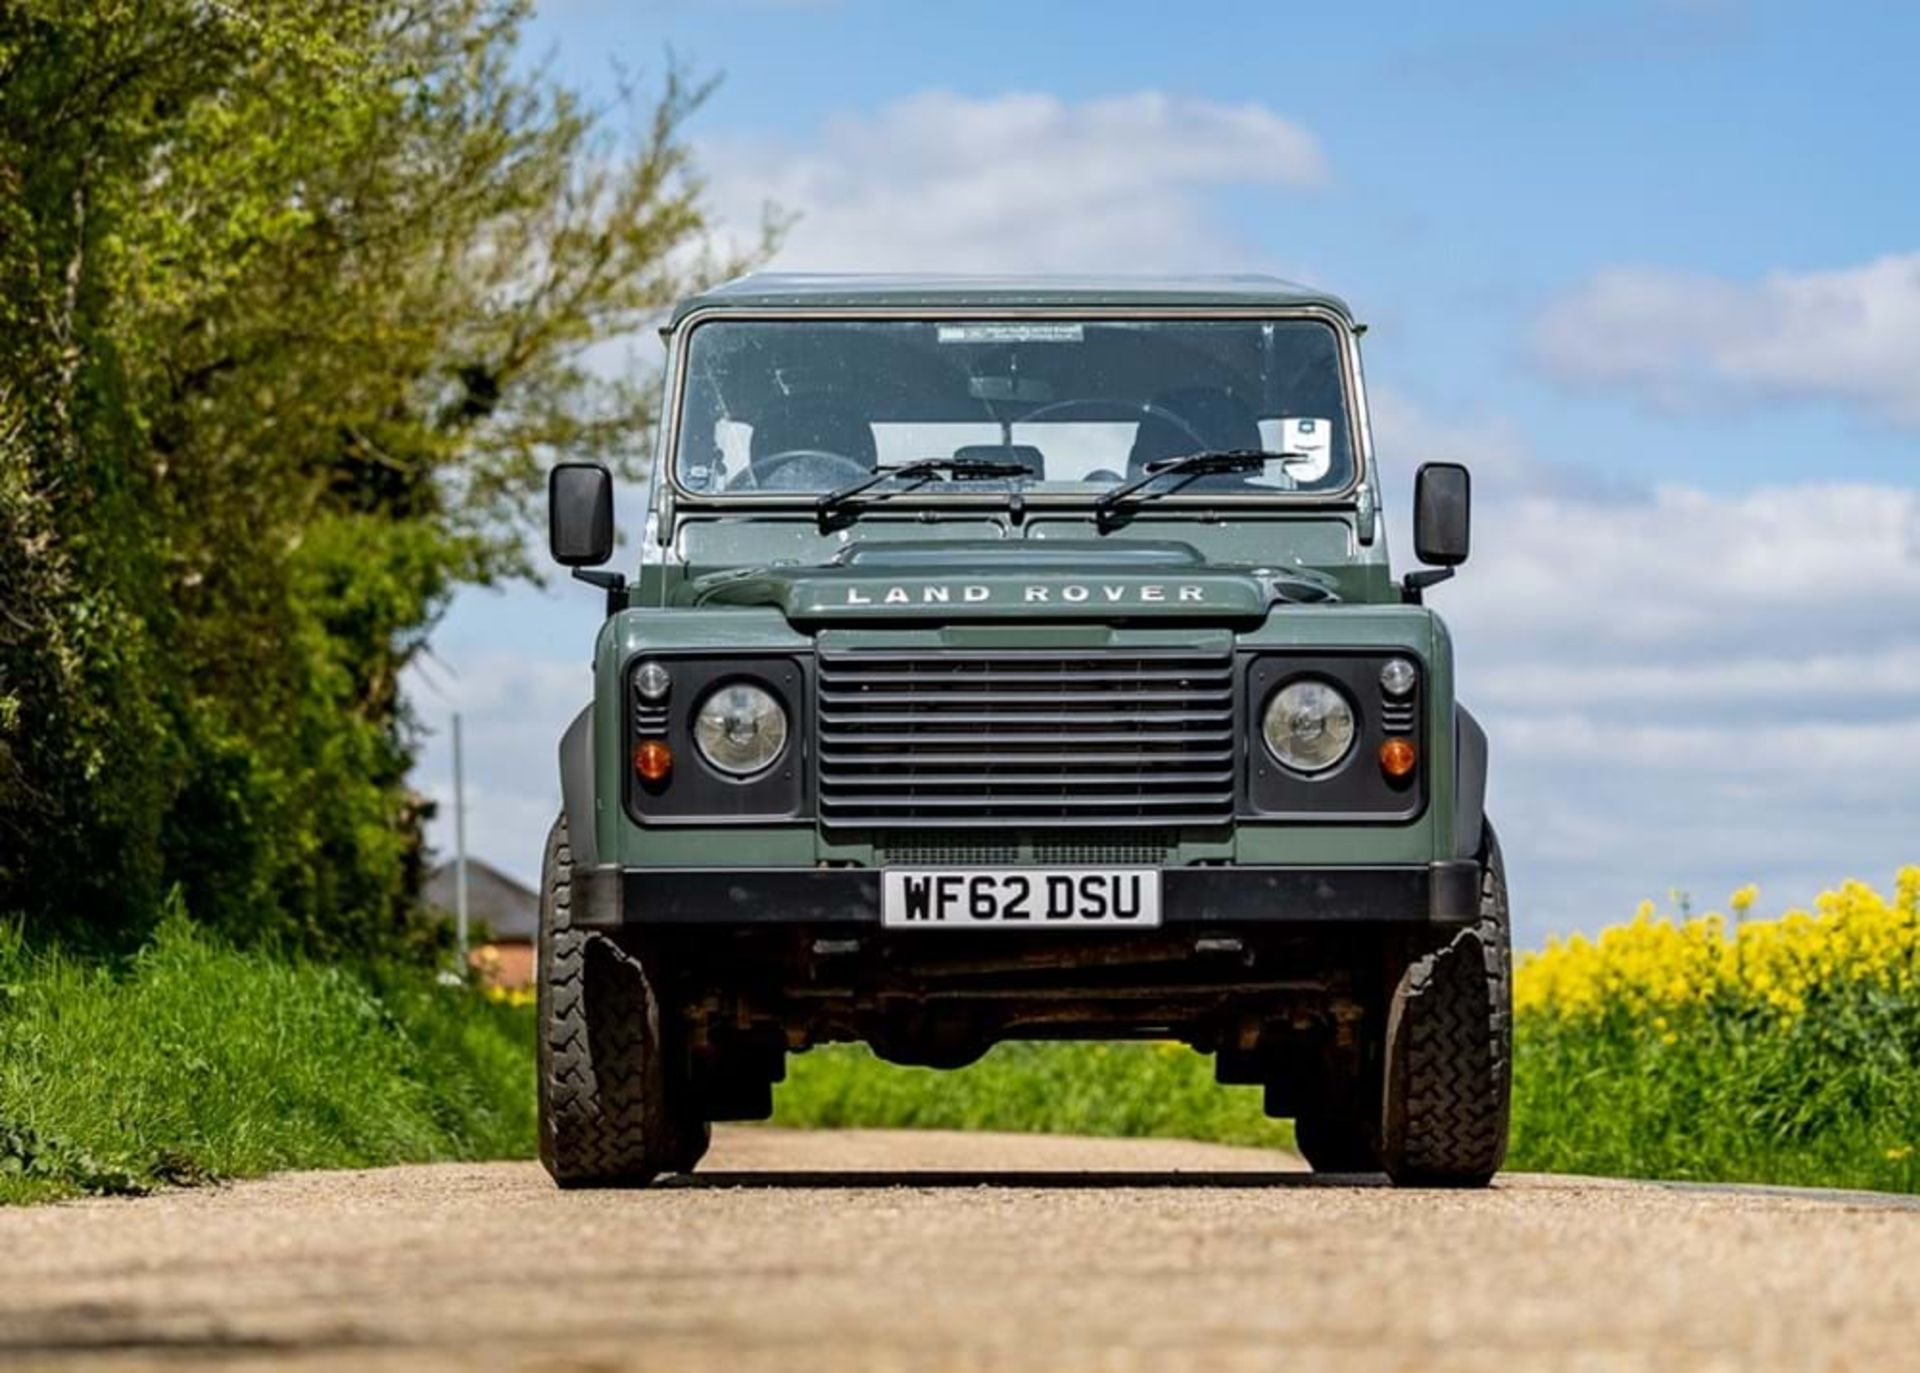 2012 Land Rover Defender Double Cab Pick-up - Image 9 of 10